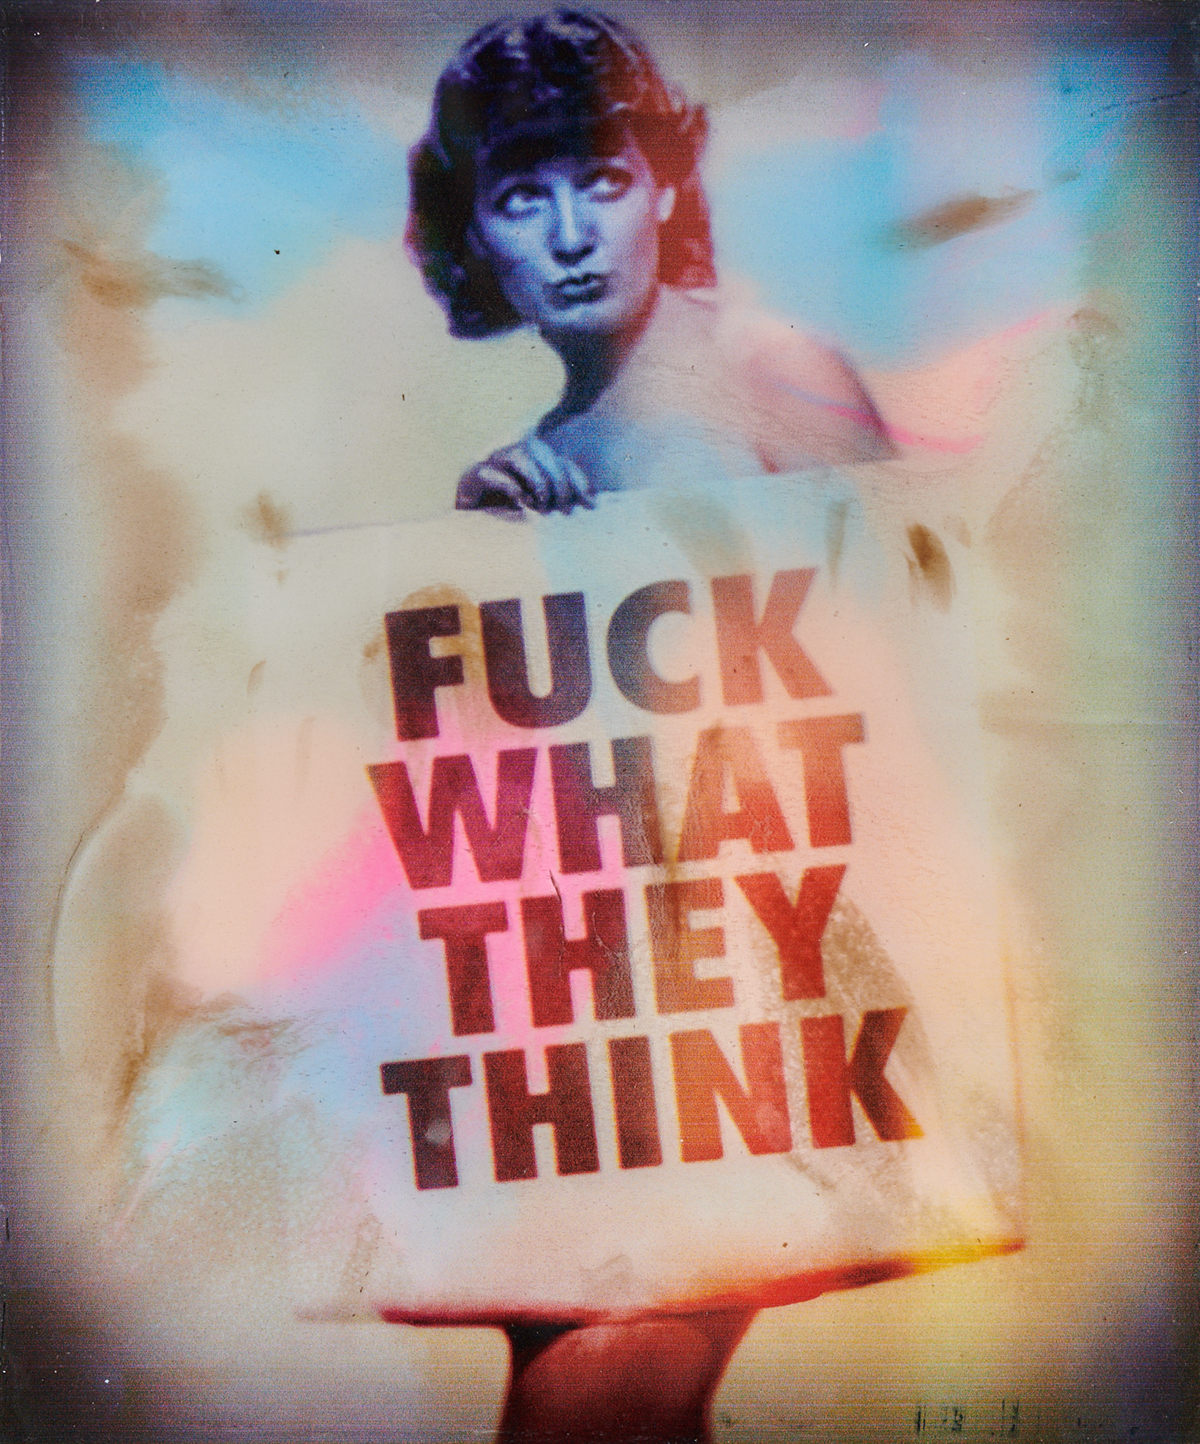 Joerg Doering – Fuck what they think